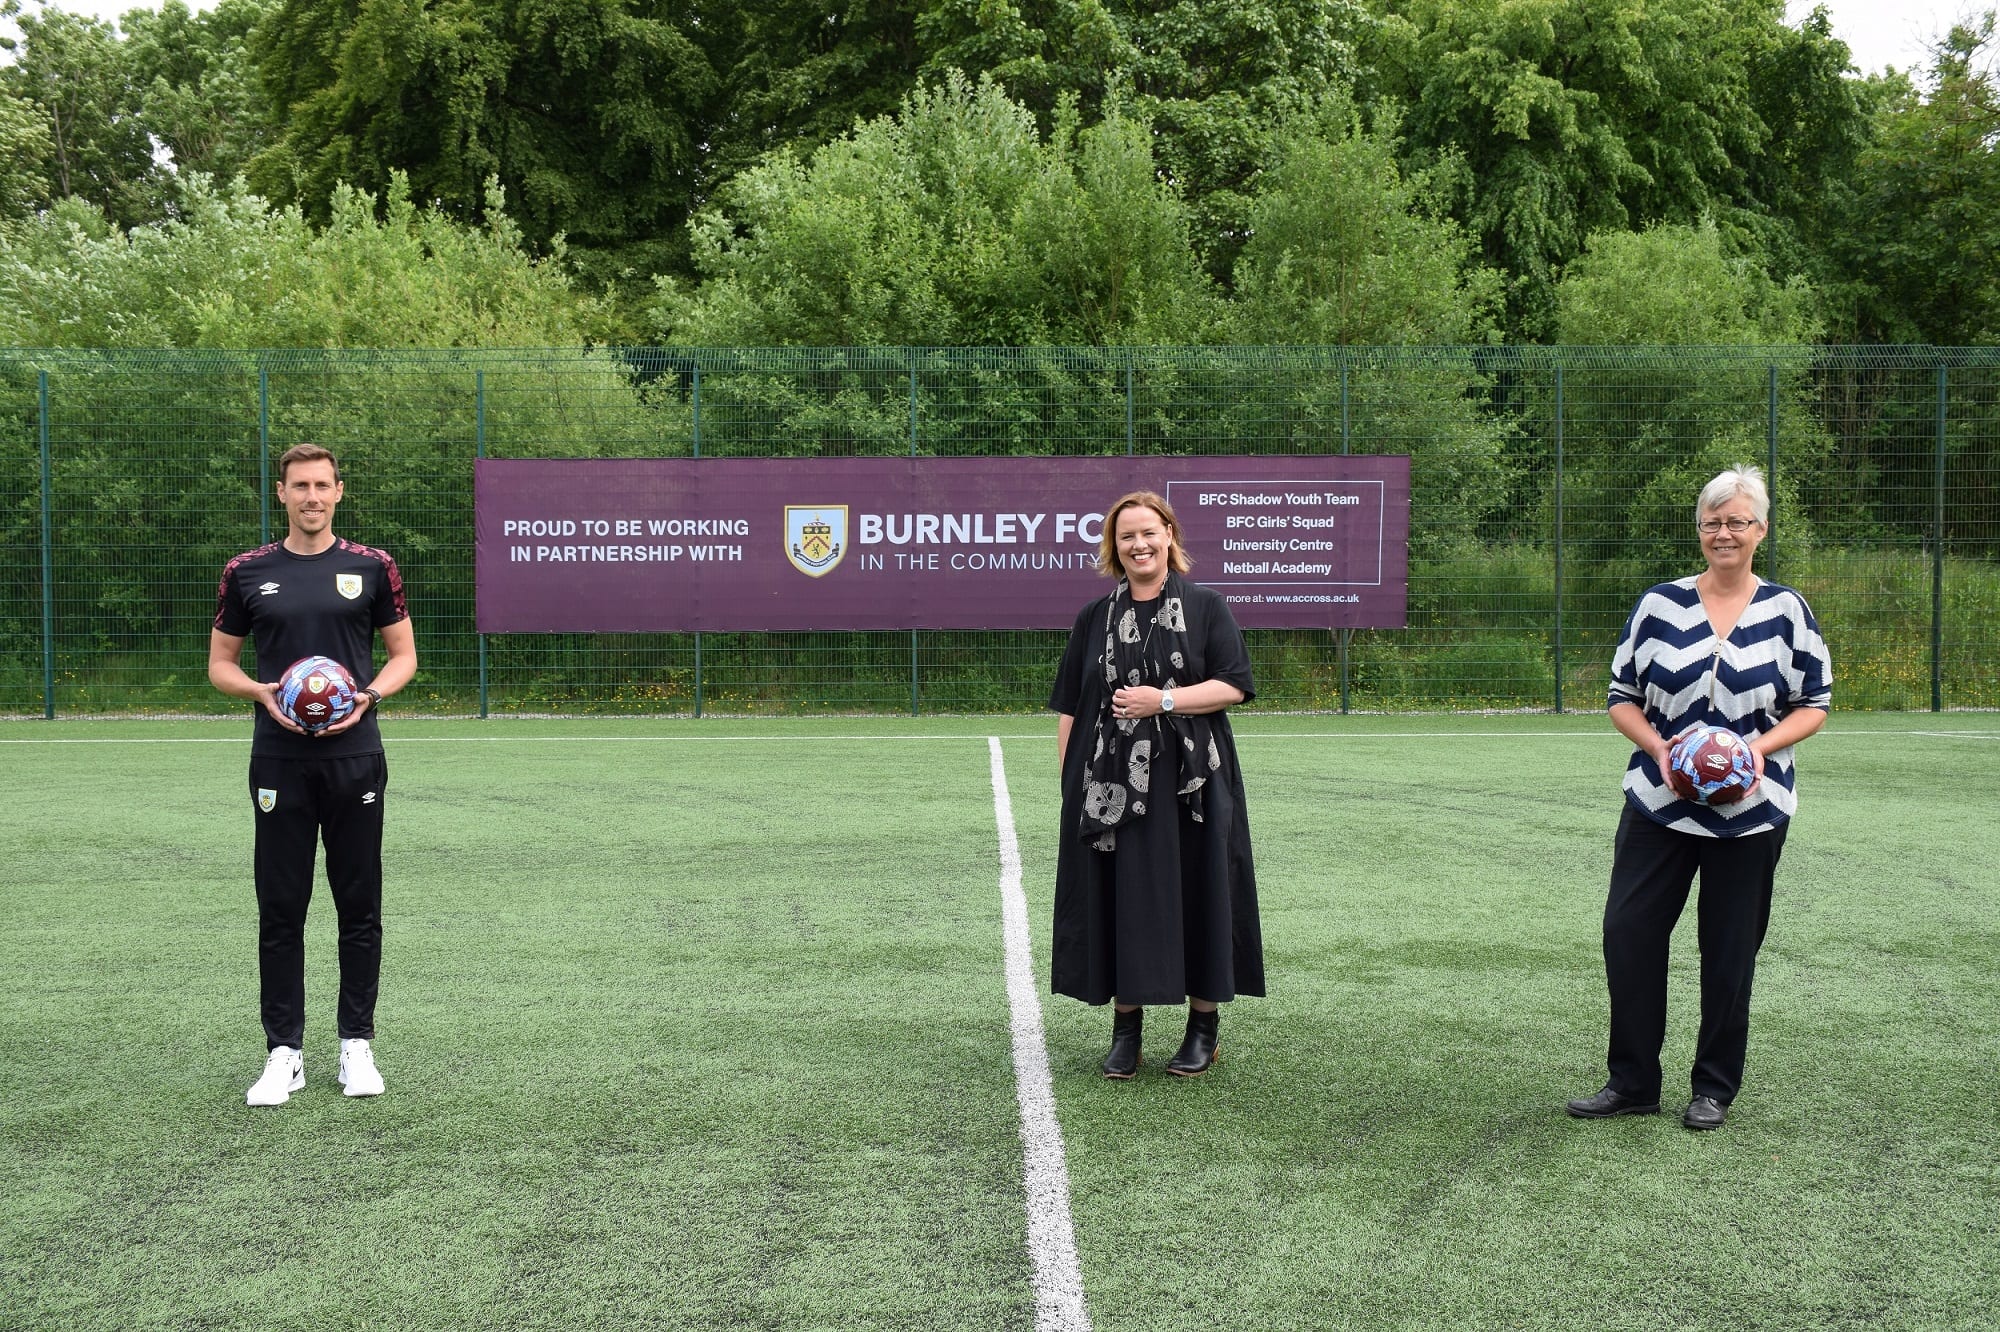 Nelson and Colne College Group's partnership with Burnley FC in the Community has expanded into Higher Education with a new university level qualification.